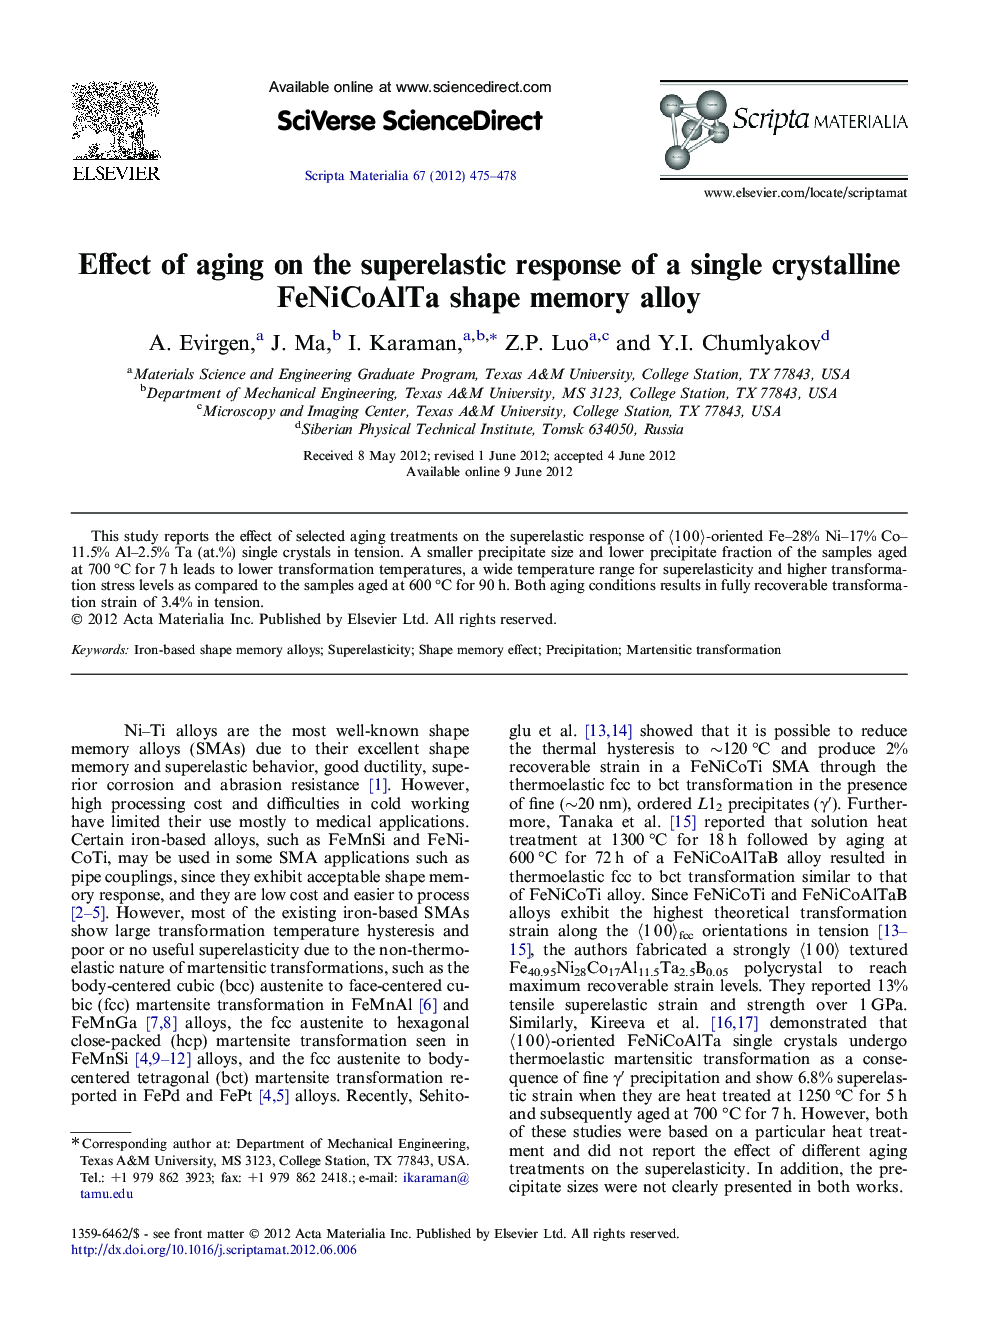 Effect of aging on the superelastic response of a single crystalline FeNiCoAlTa shape memory alloy